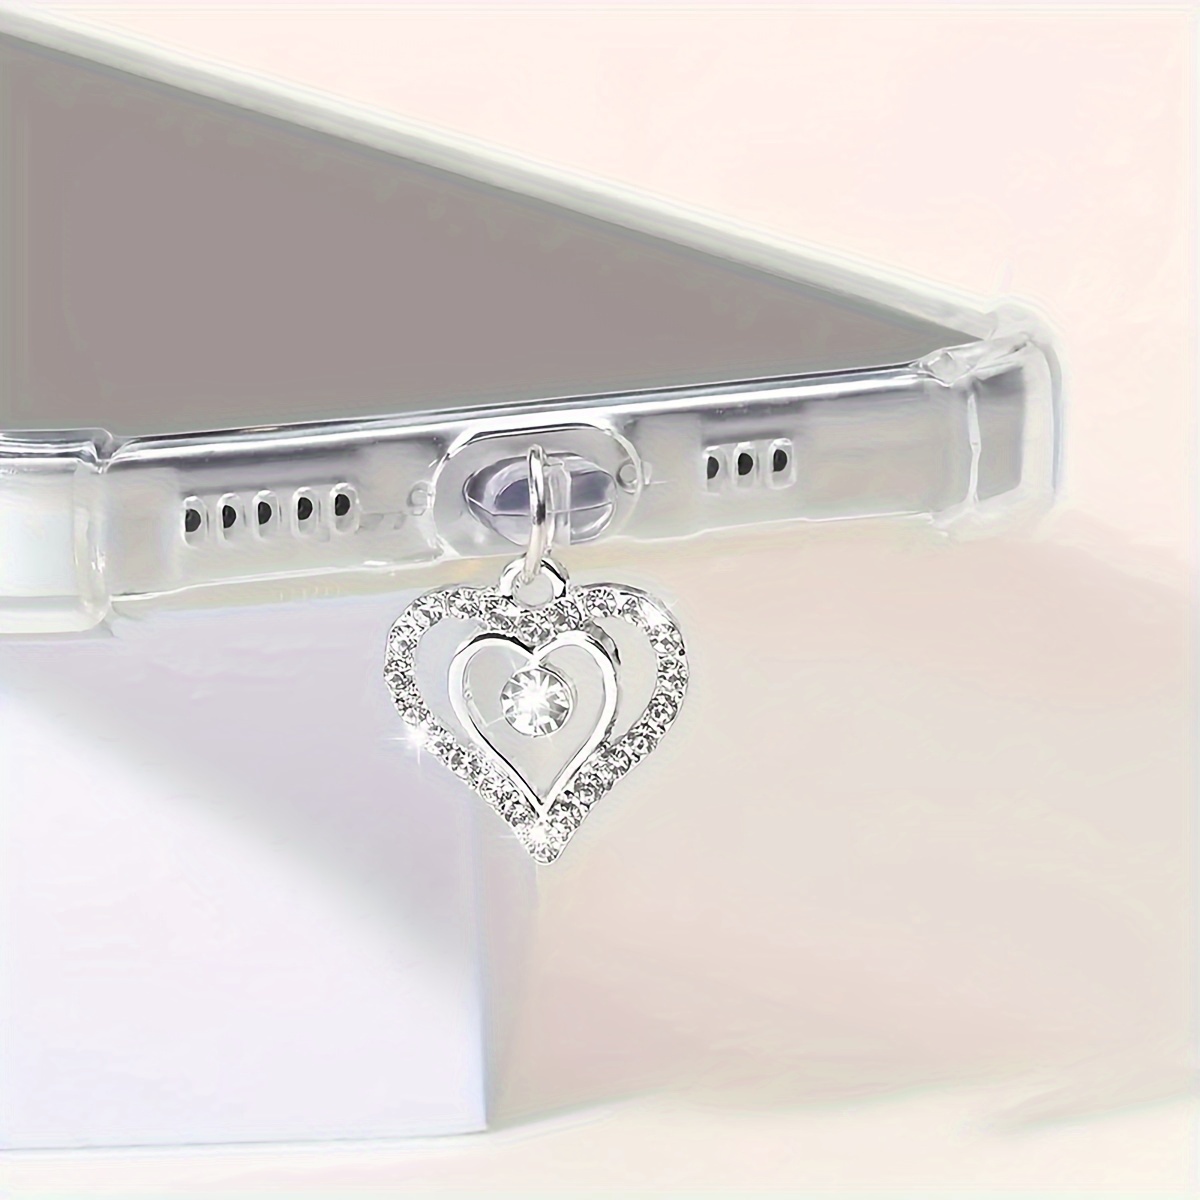 

Sparkling Heart Crystal Anti-dust Plug - Durable High-quality Sealing Material Compatible With Samsung/xiaomi Phones, Iphone And Type-c Interface Devices